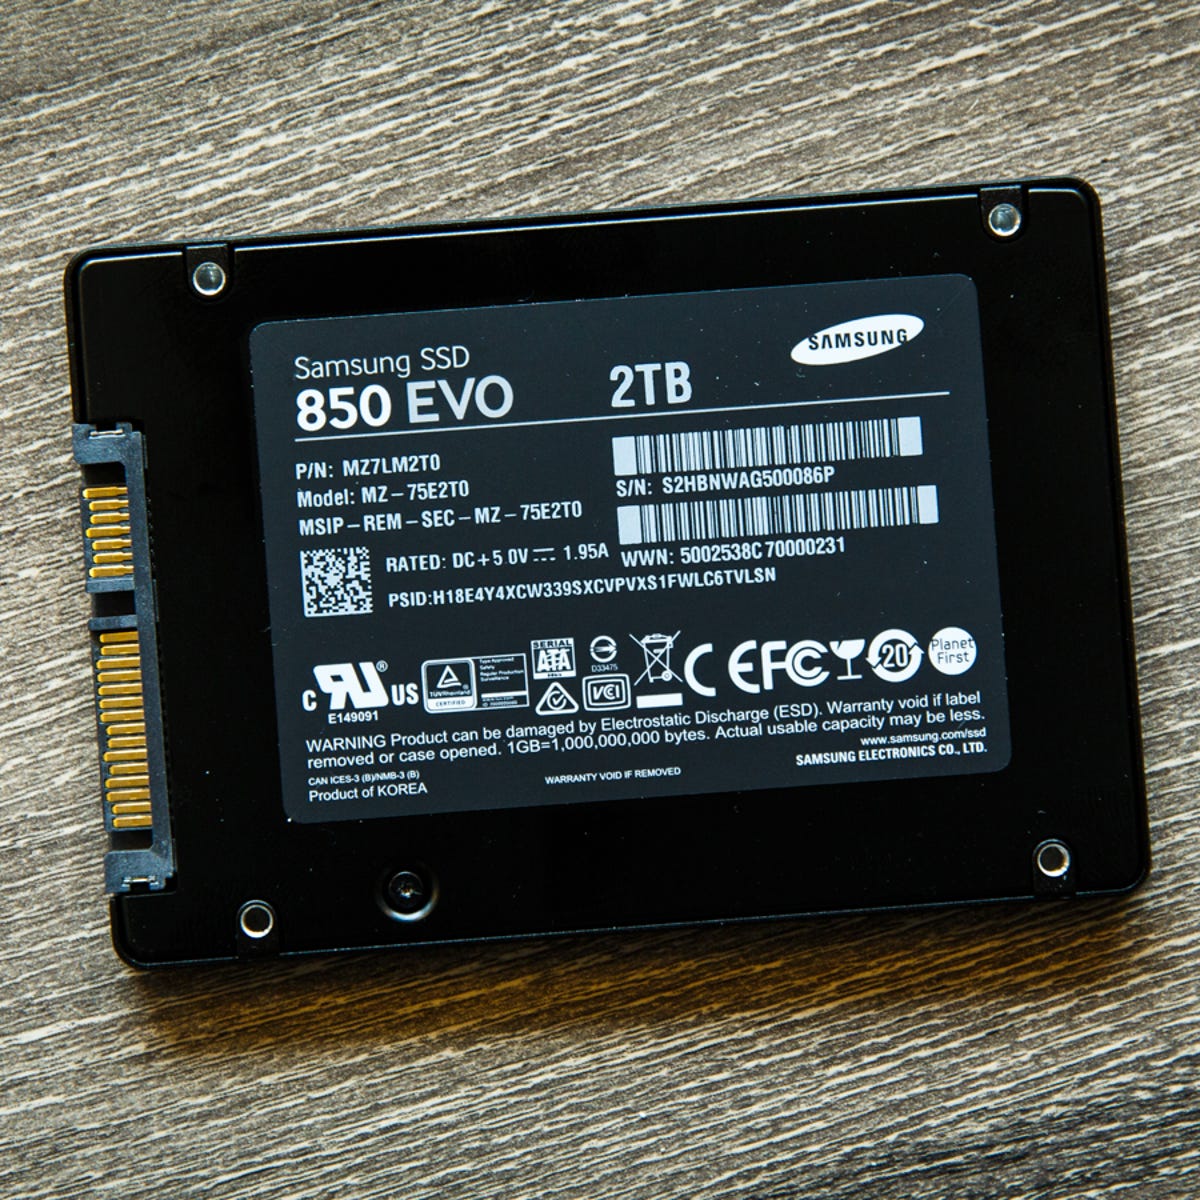 circulation Freeze Every year Samsung SSD 850 Evo review: Top performance for a low price - CNET